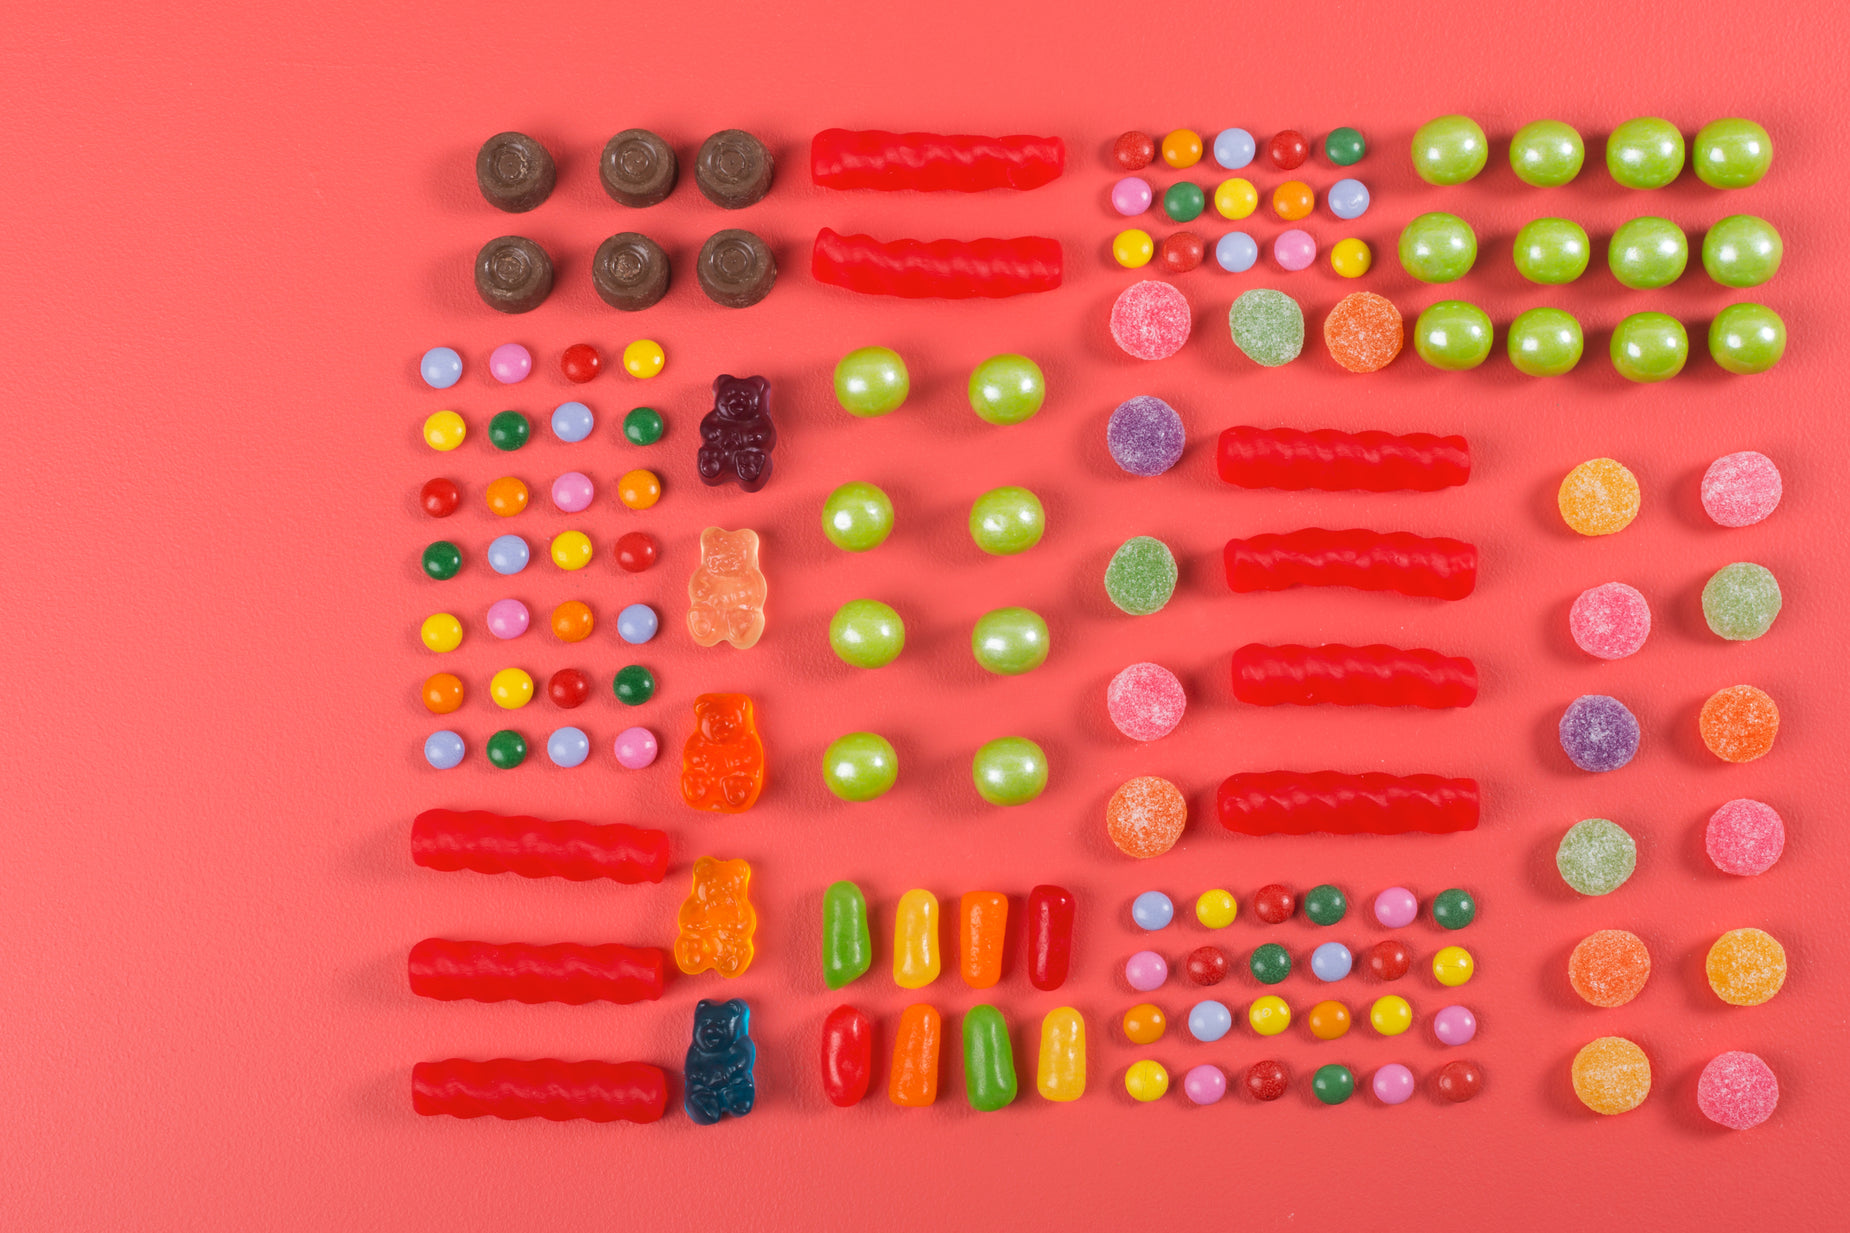 a variety of candys and candies spread out on a bright pink background